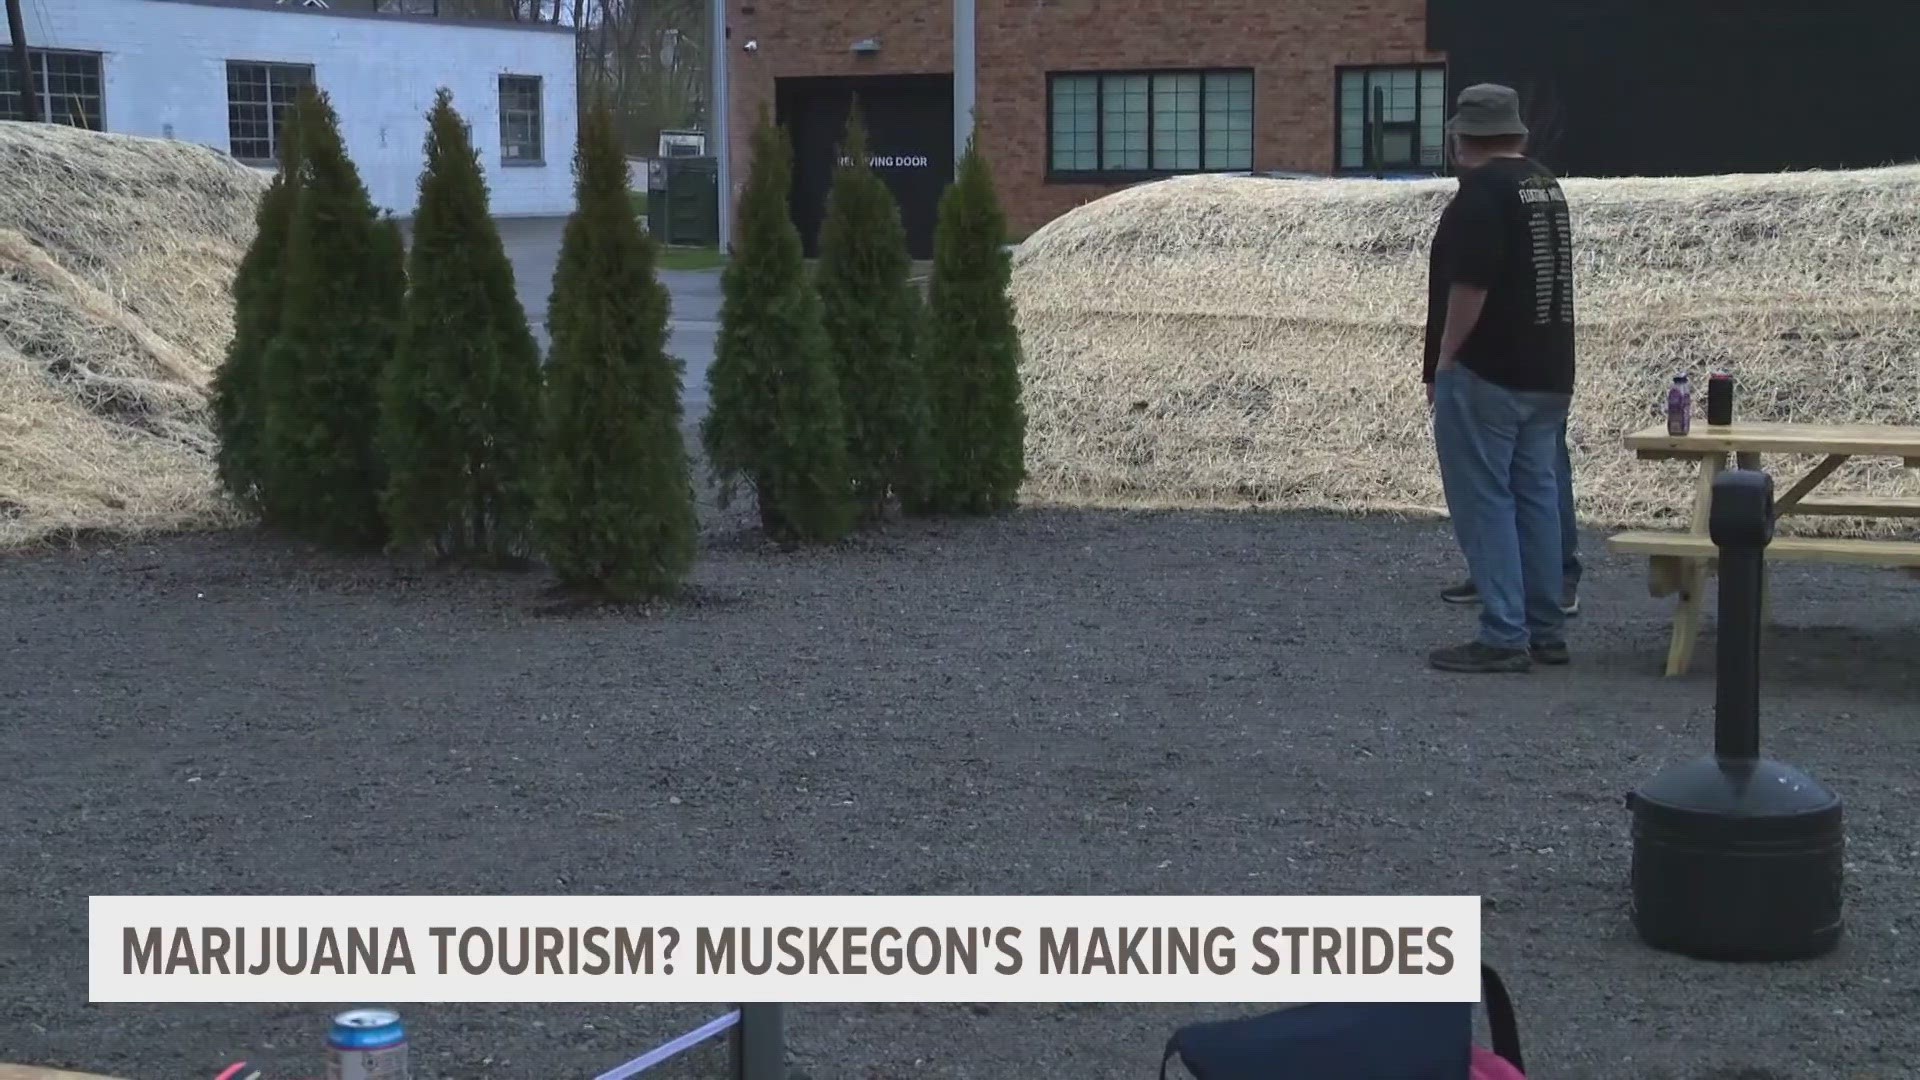 A new outdoor space for marijuana consumption is now open in Muskegon, just in time for the biggest marijuana holiday of the year.